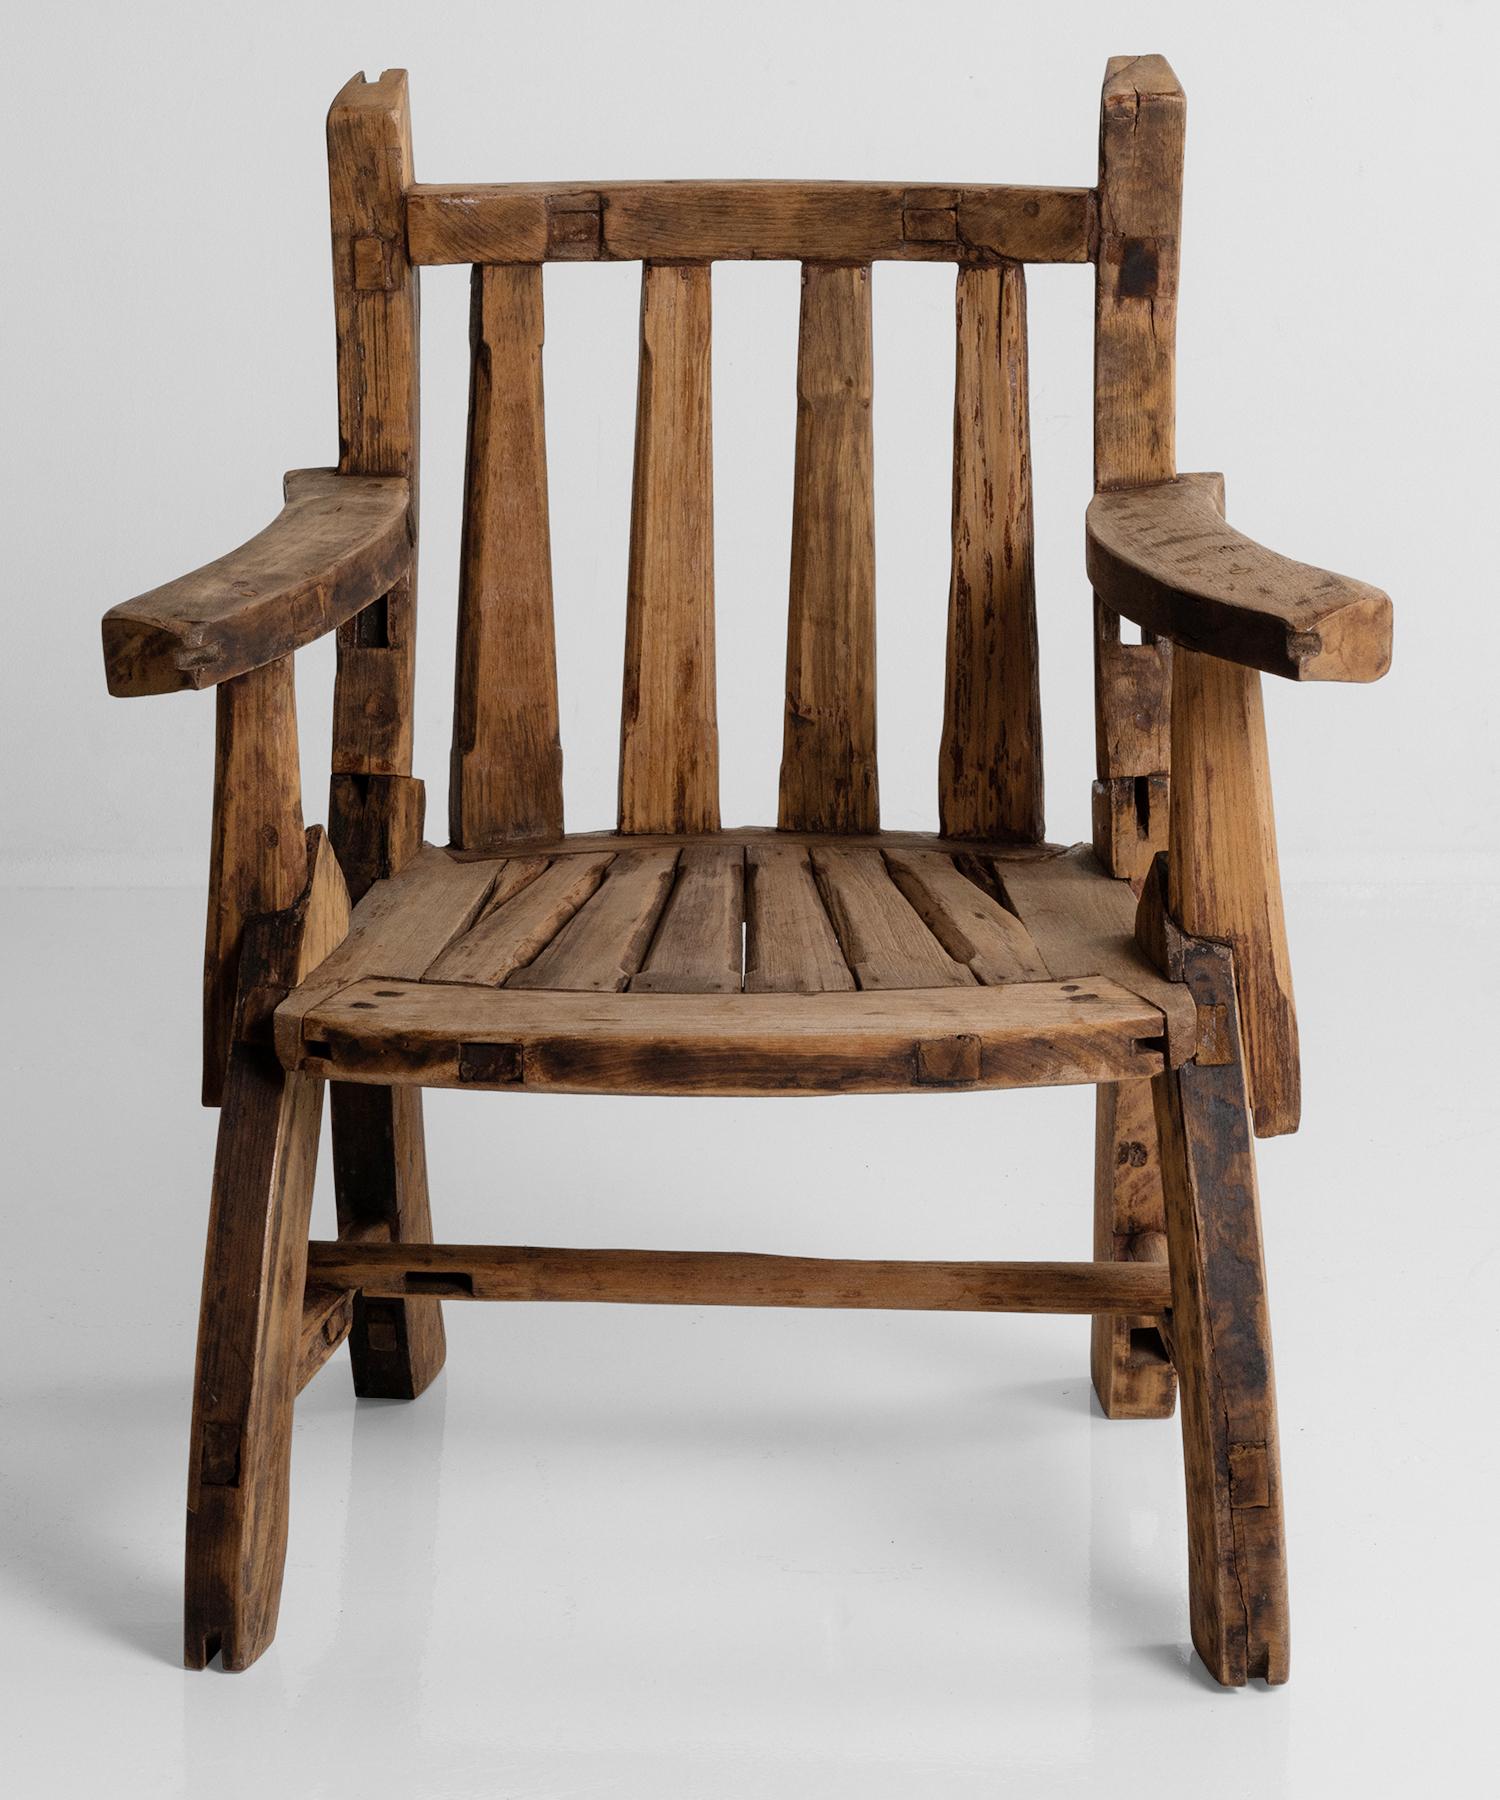 French Timber Outdoor Chairs, France circa 1930